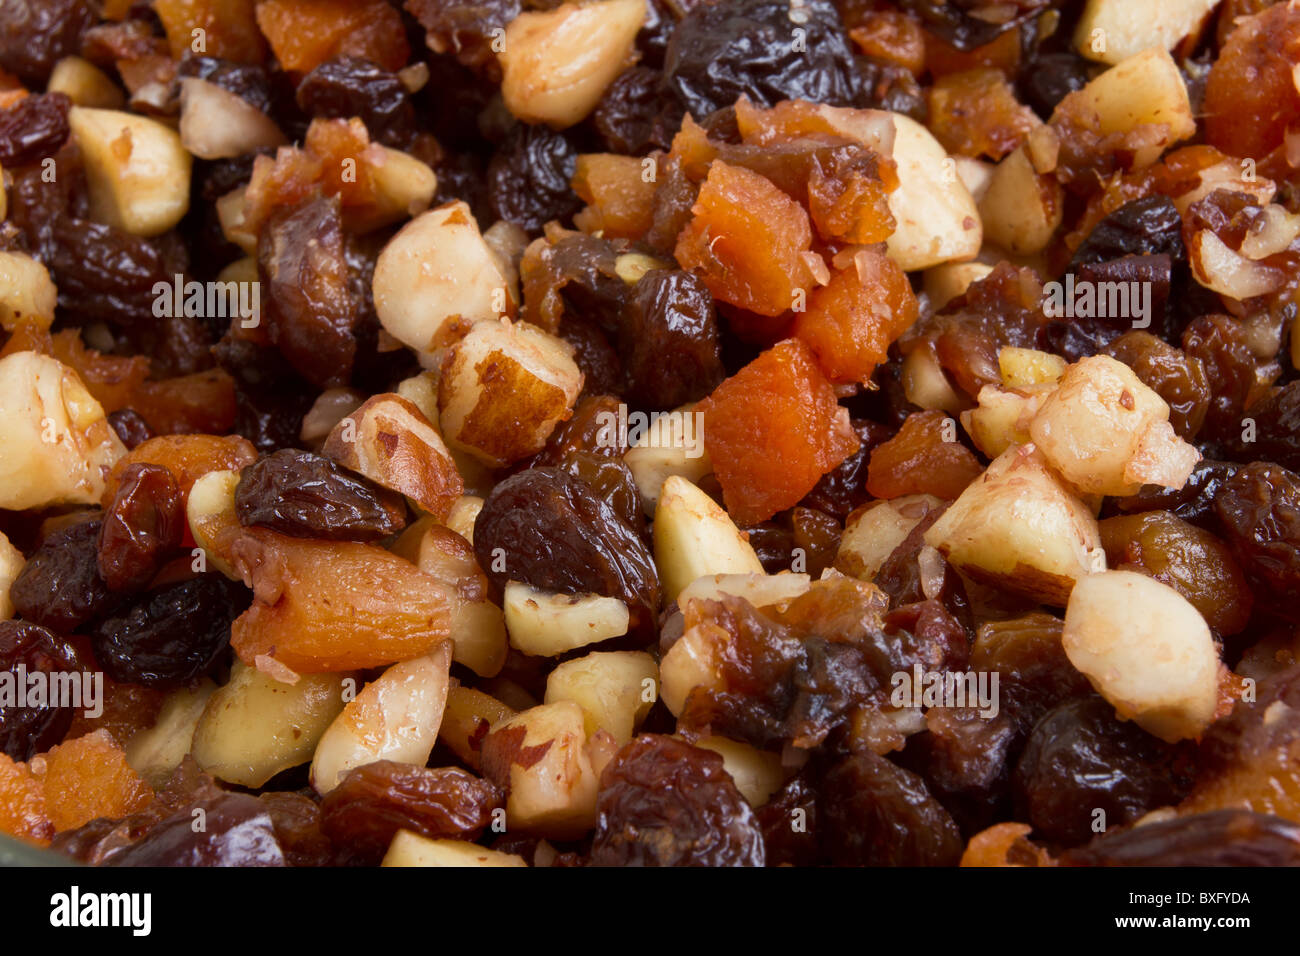 Background or texture of Xmas Cake Mix of nuts and soft fruits close up. Stock Photo